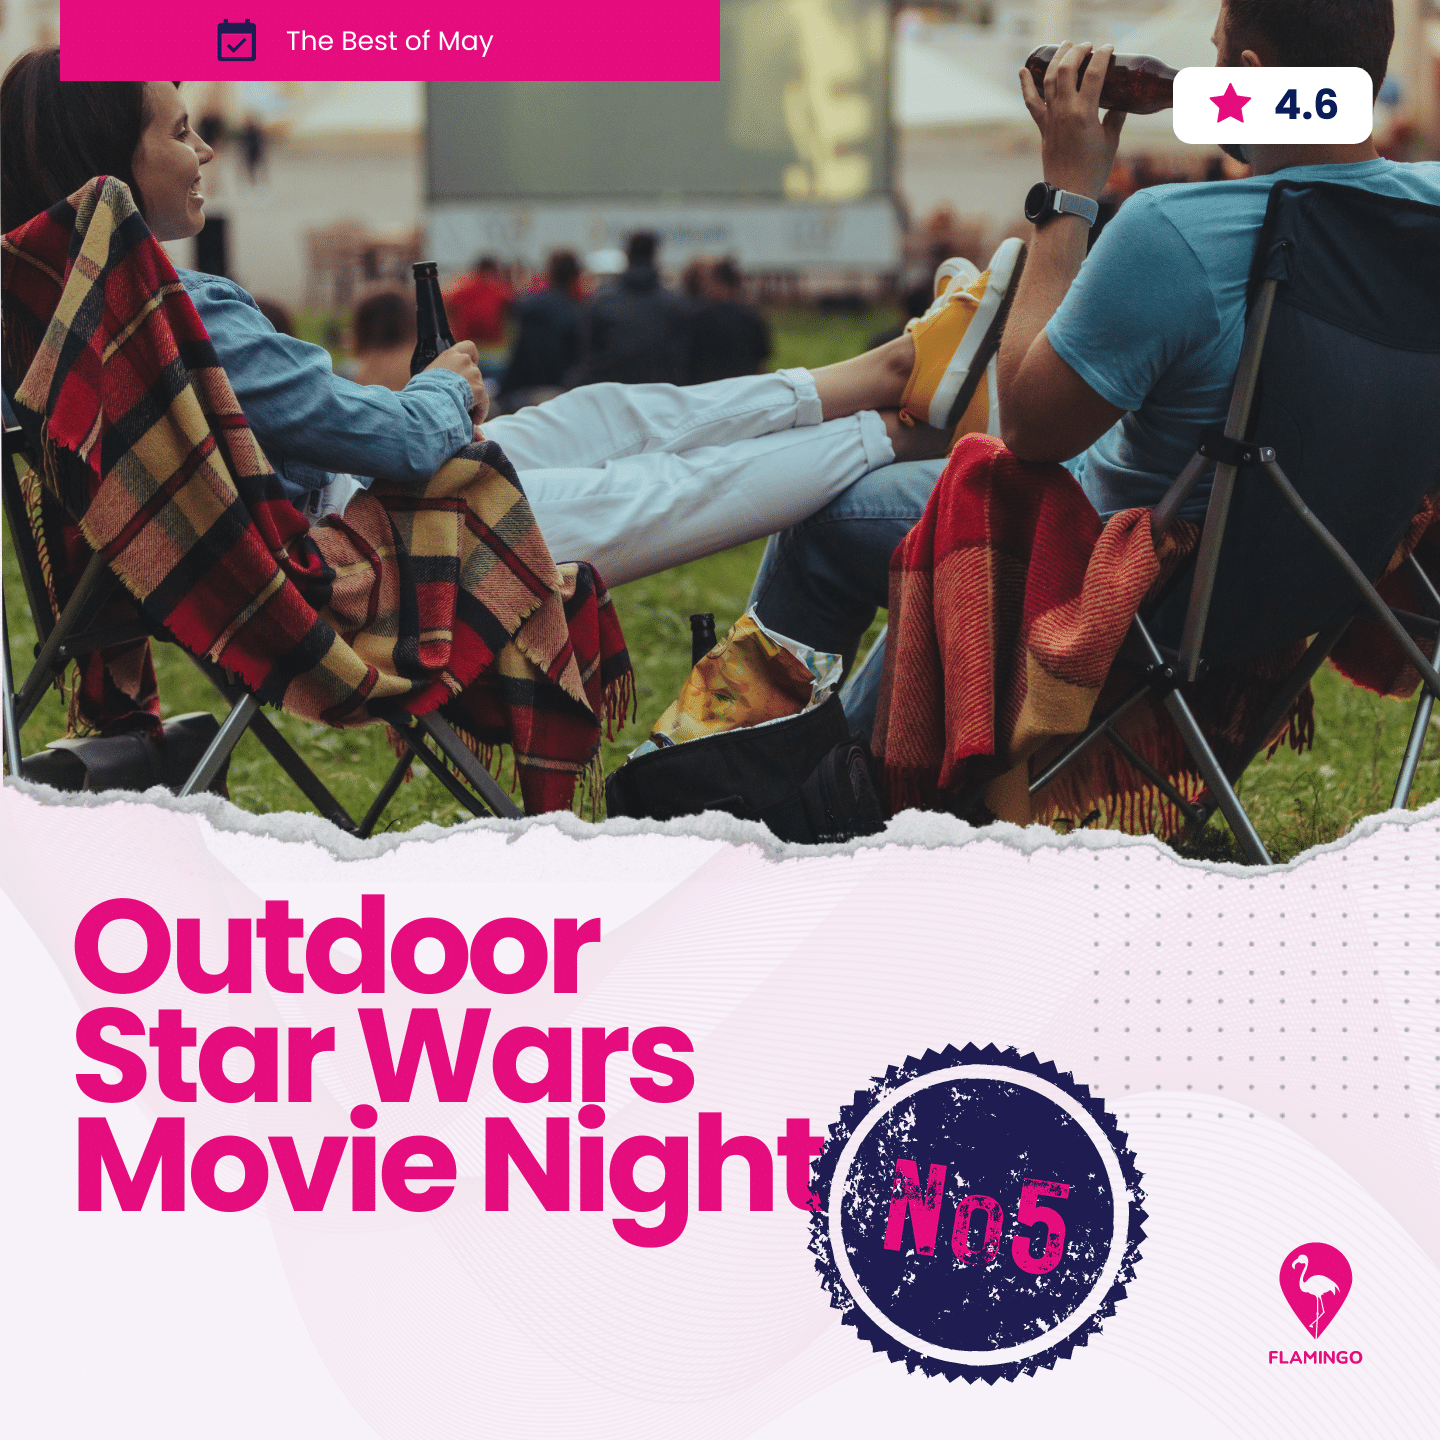 Outdoor Star Wars Movie Night | Resident Event Ideas for May